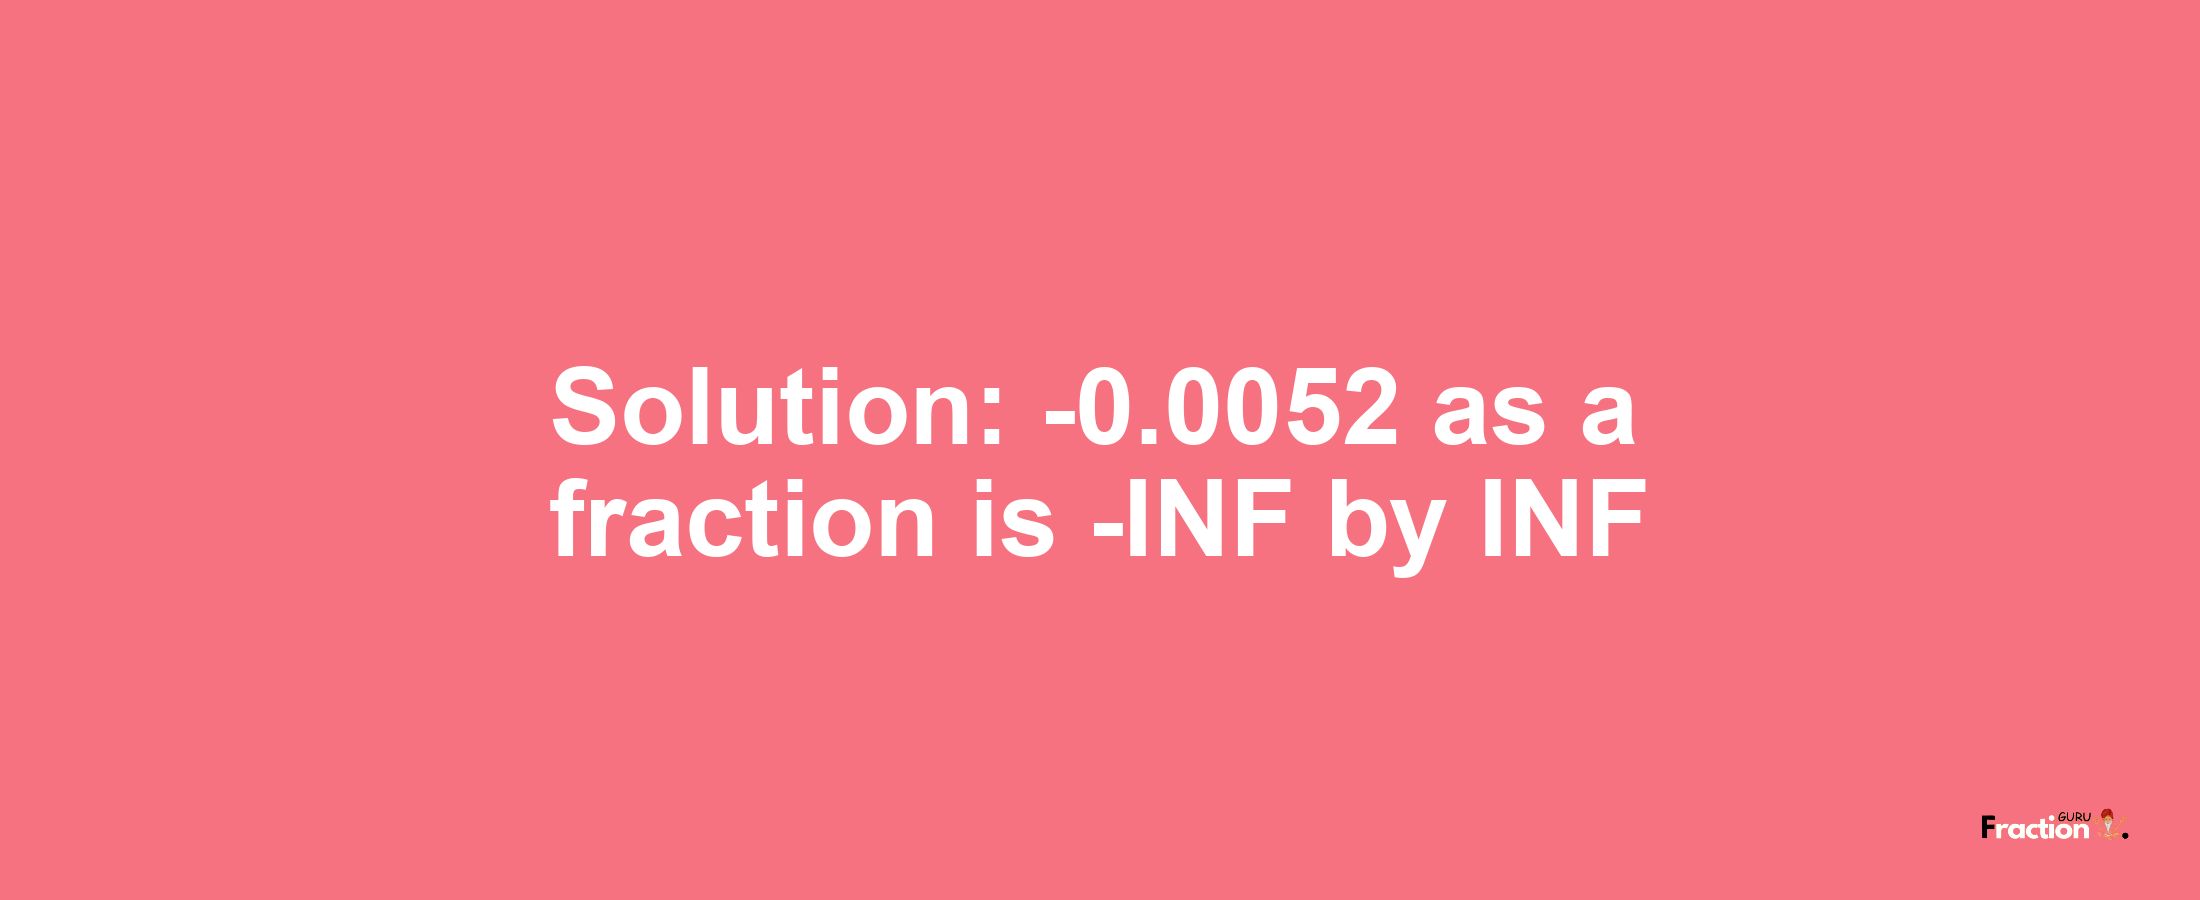 Solution:-0.0052 as a fraction is -INF/INF